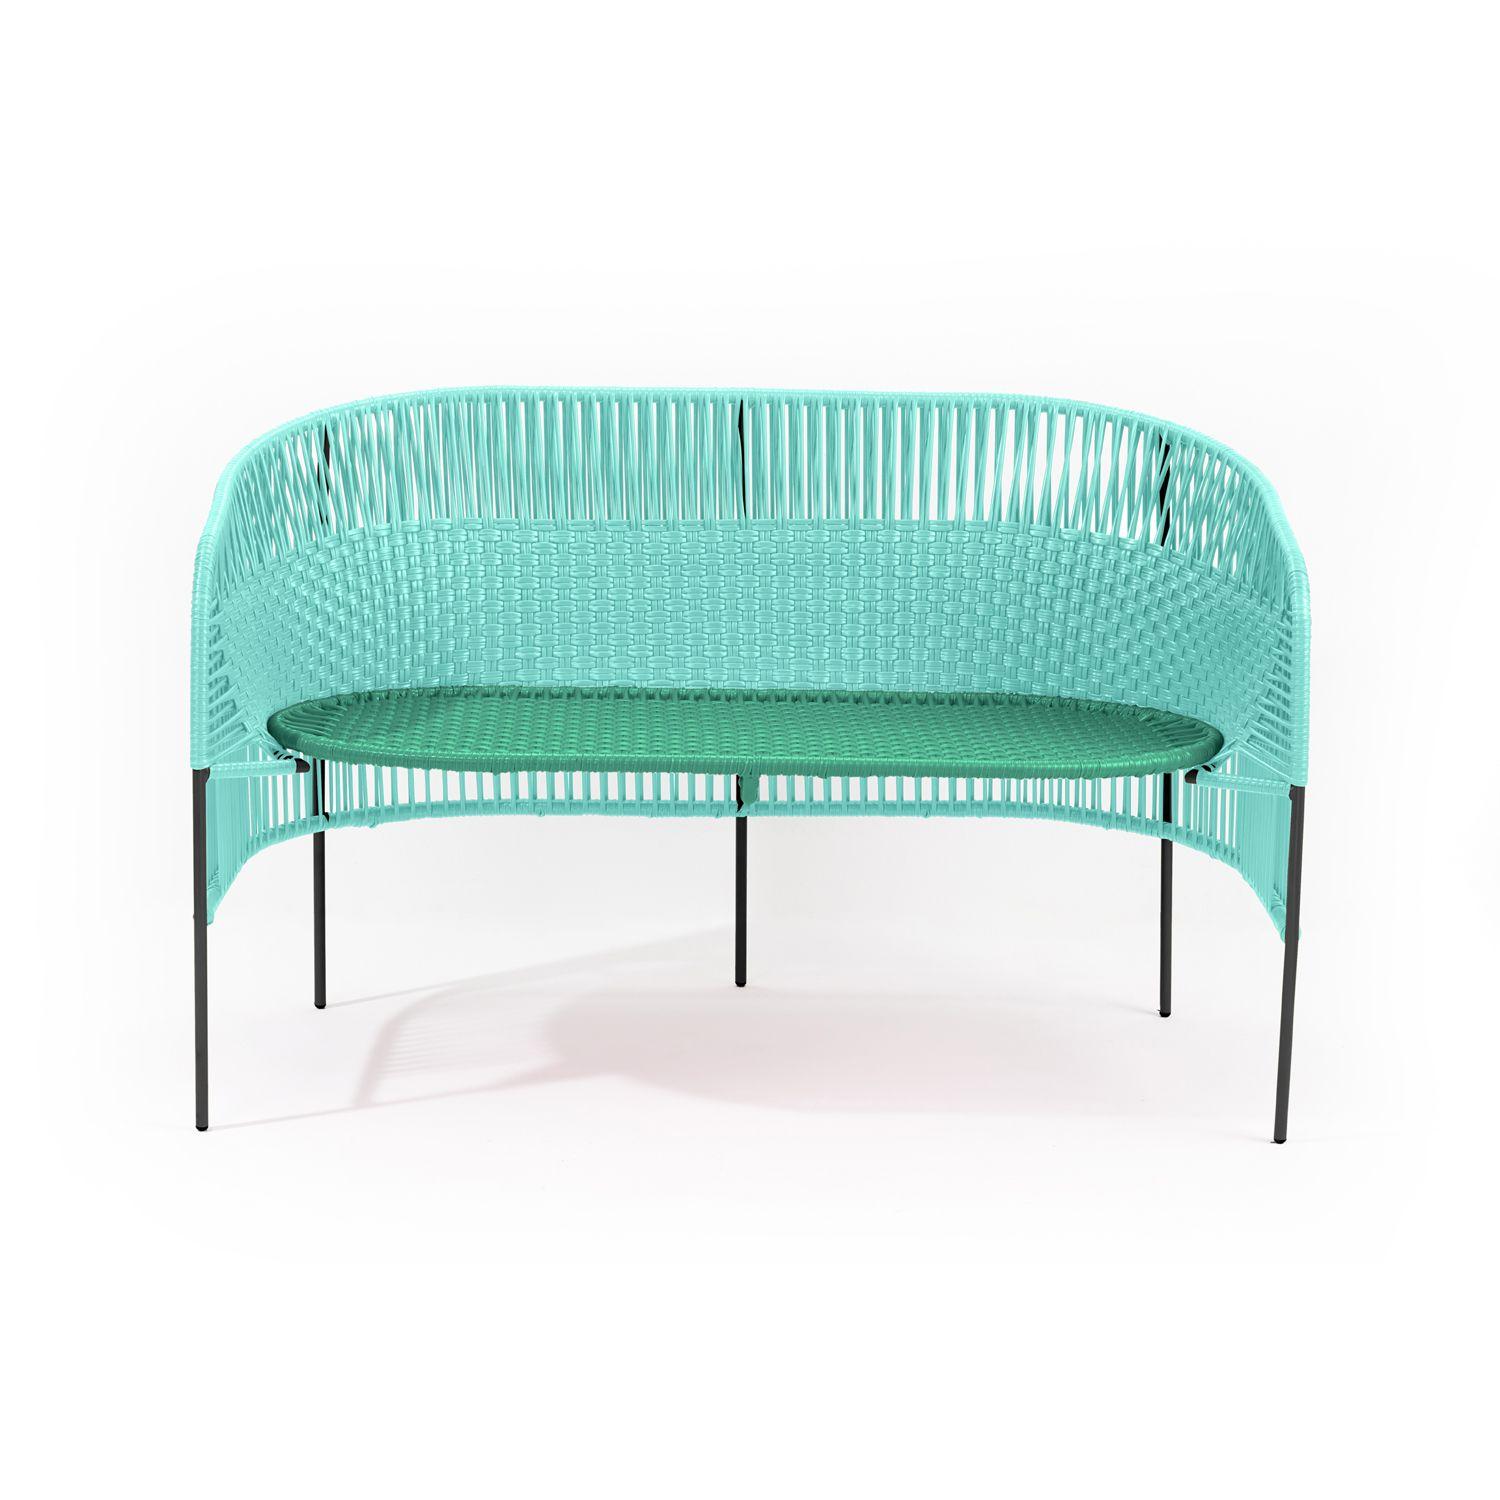 German Ames Caribe 2 Seater Outdoor Bench by Sebastian Herkner For Sale